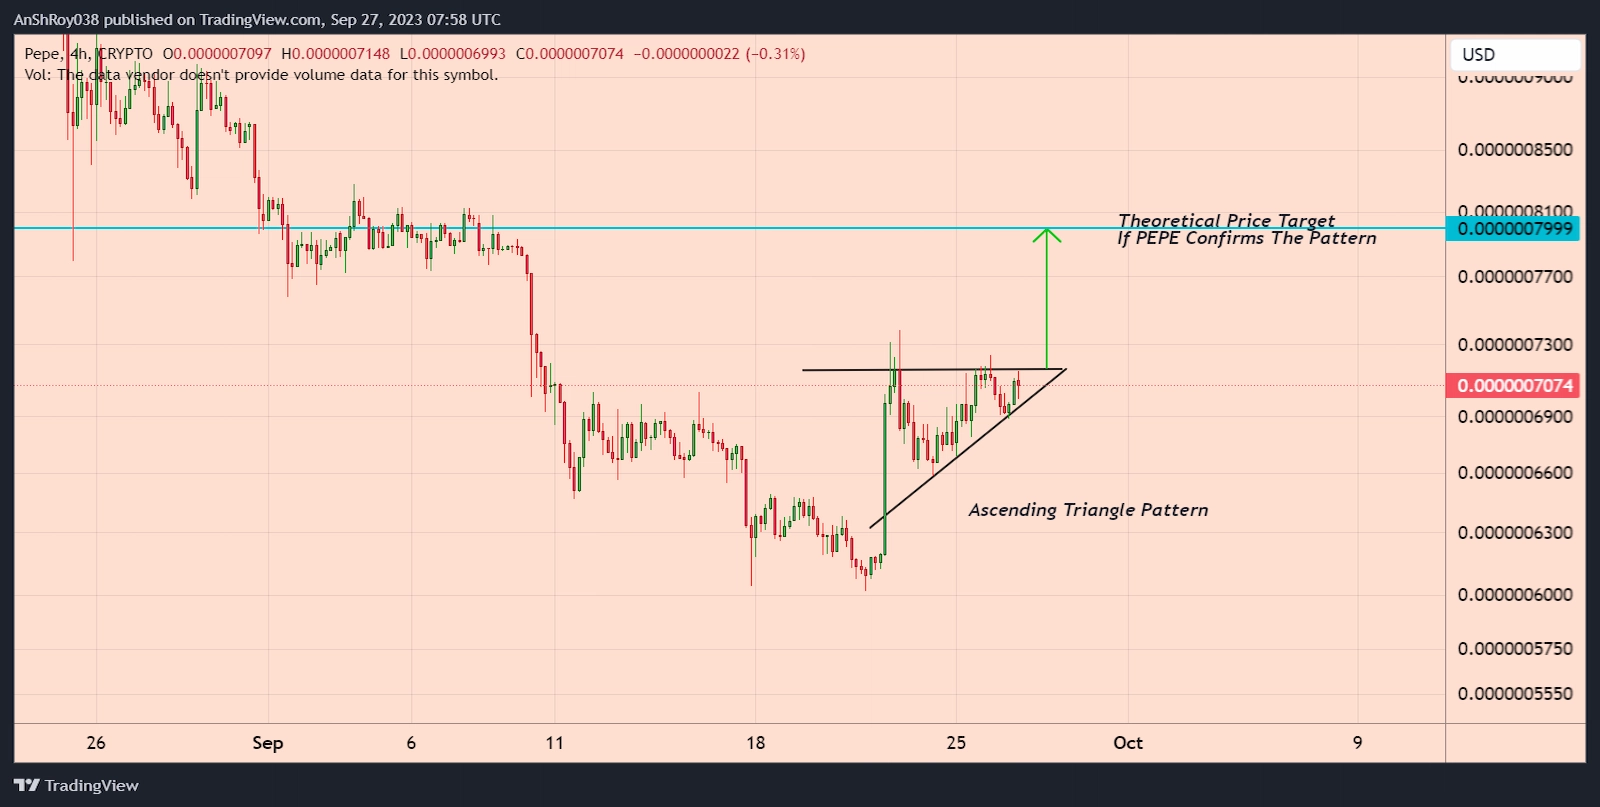 PEPE price formed a bullish technical pattern with a 13% price target. 